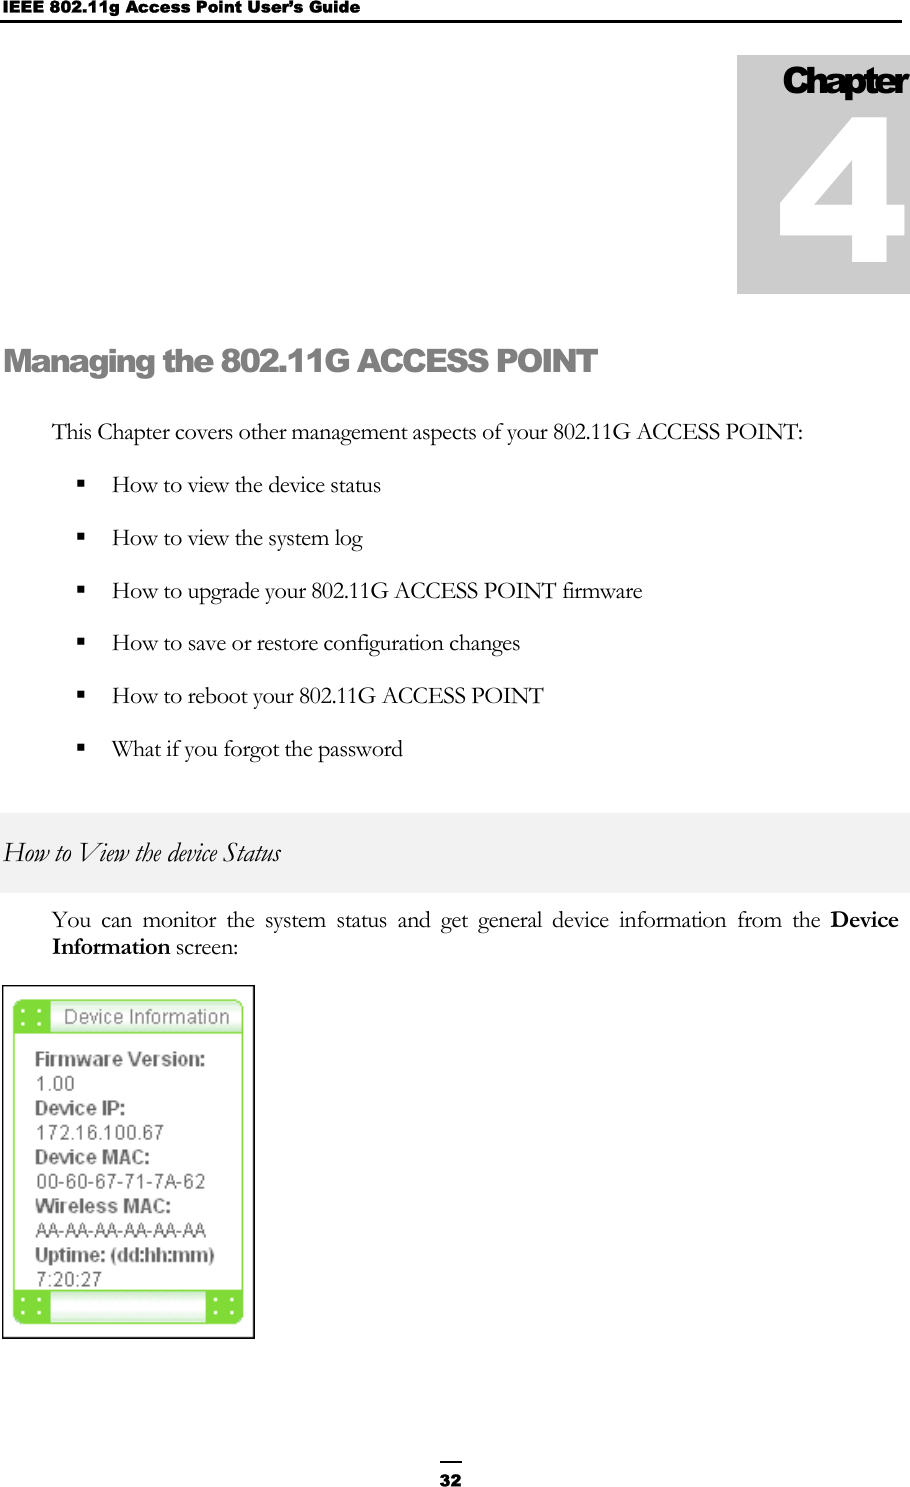 IEEE 802.11g Access Point User’s Guide  32Managing the 802.11G ACCESS POINT This Chapter covers other management aspects of your 802.11G ACCESS POINT:  How to view the device status  How to view the system log  How to upgrade your 802.11G ACCESS POINT firmware  How to save or restore configuration changes  How to reboot your 802.11G ACCESS POINT  What if you forgot the password How to View the device Status You can monitor the system status and get general device information from the Device Information screen:  Chapter 4 